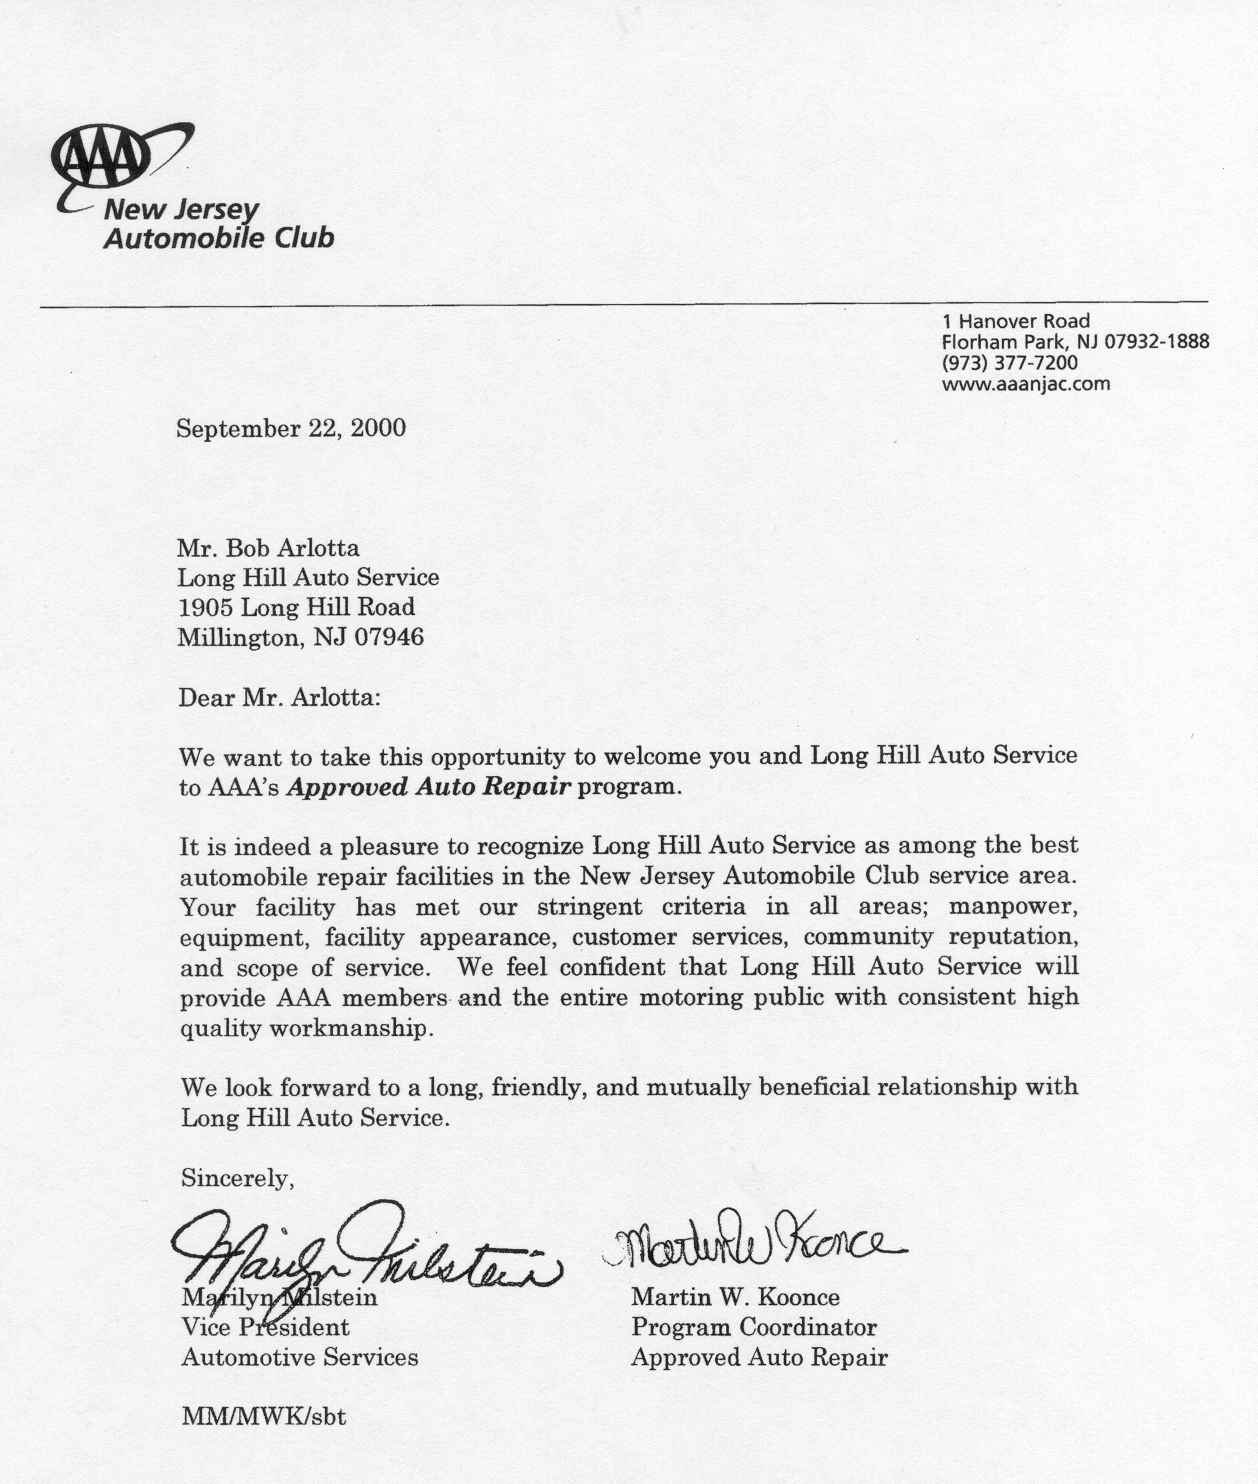 Sample Letter Of Recognition For Job Well Done from longhillauto.com